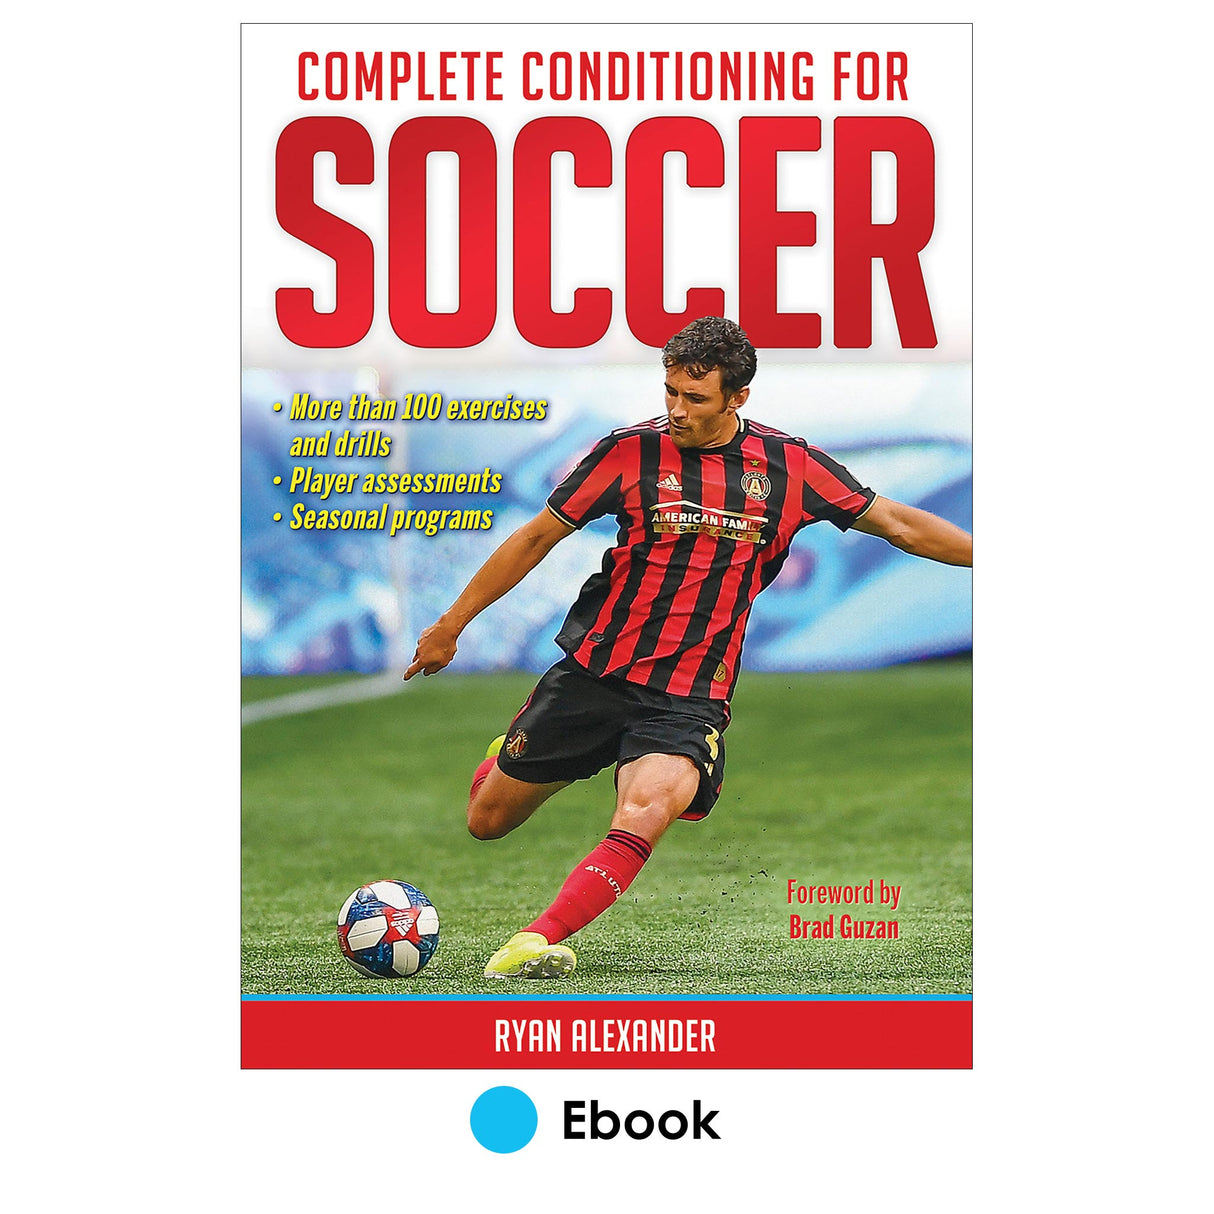 Complete Conditioning for Soccer epub